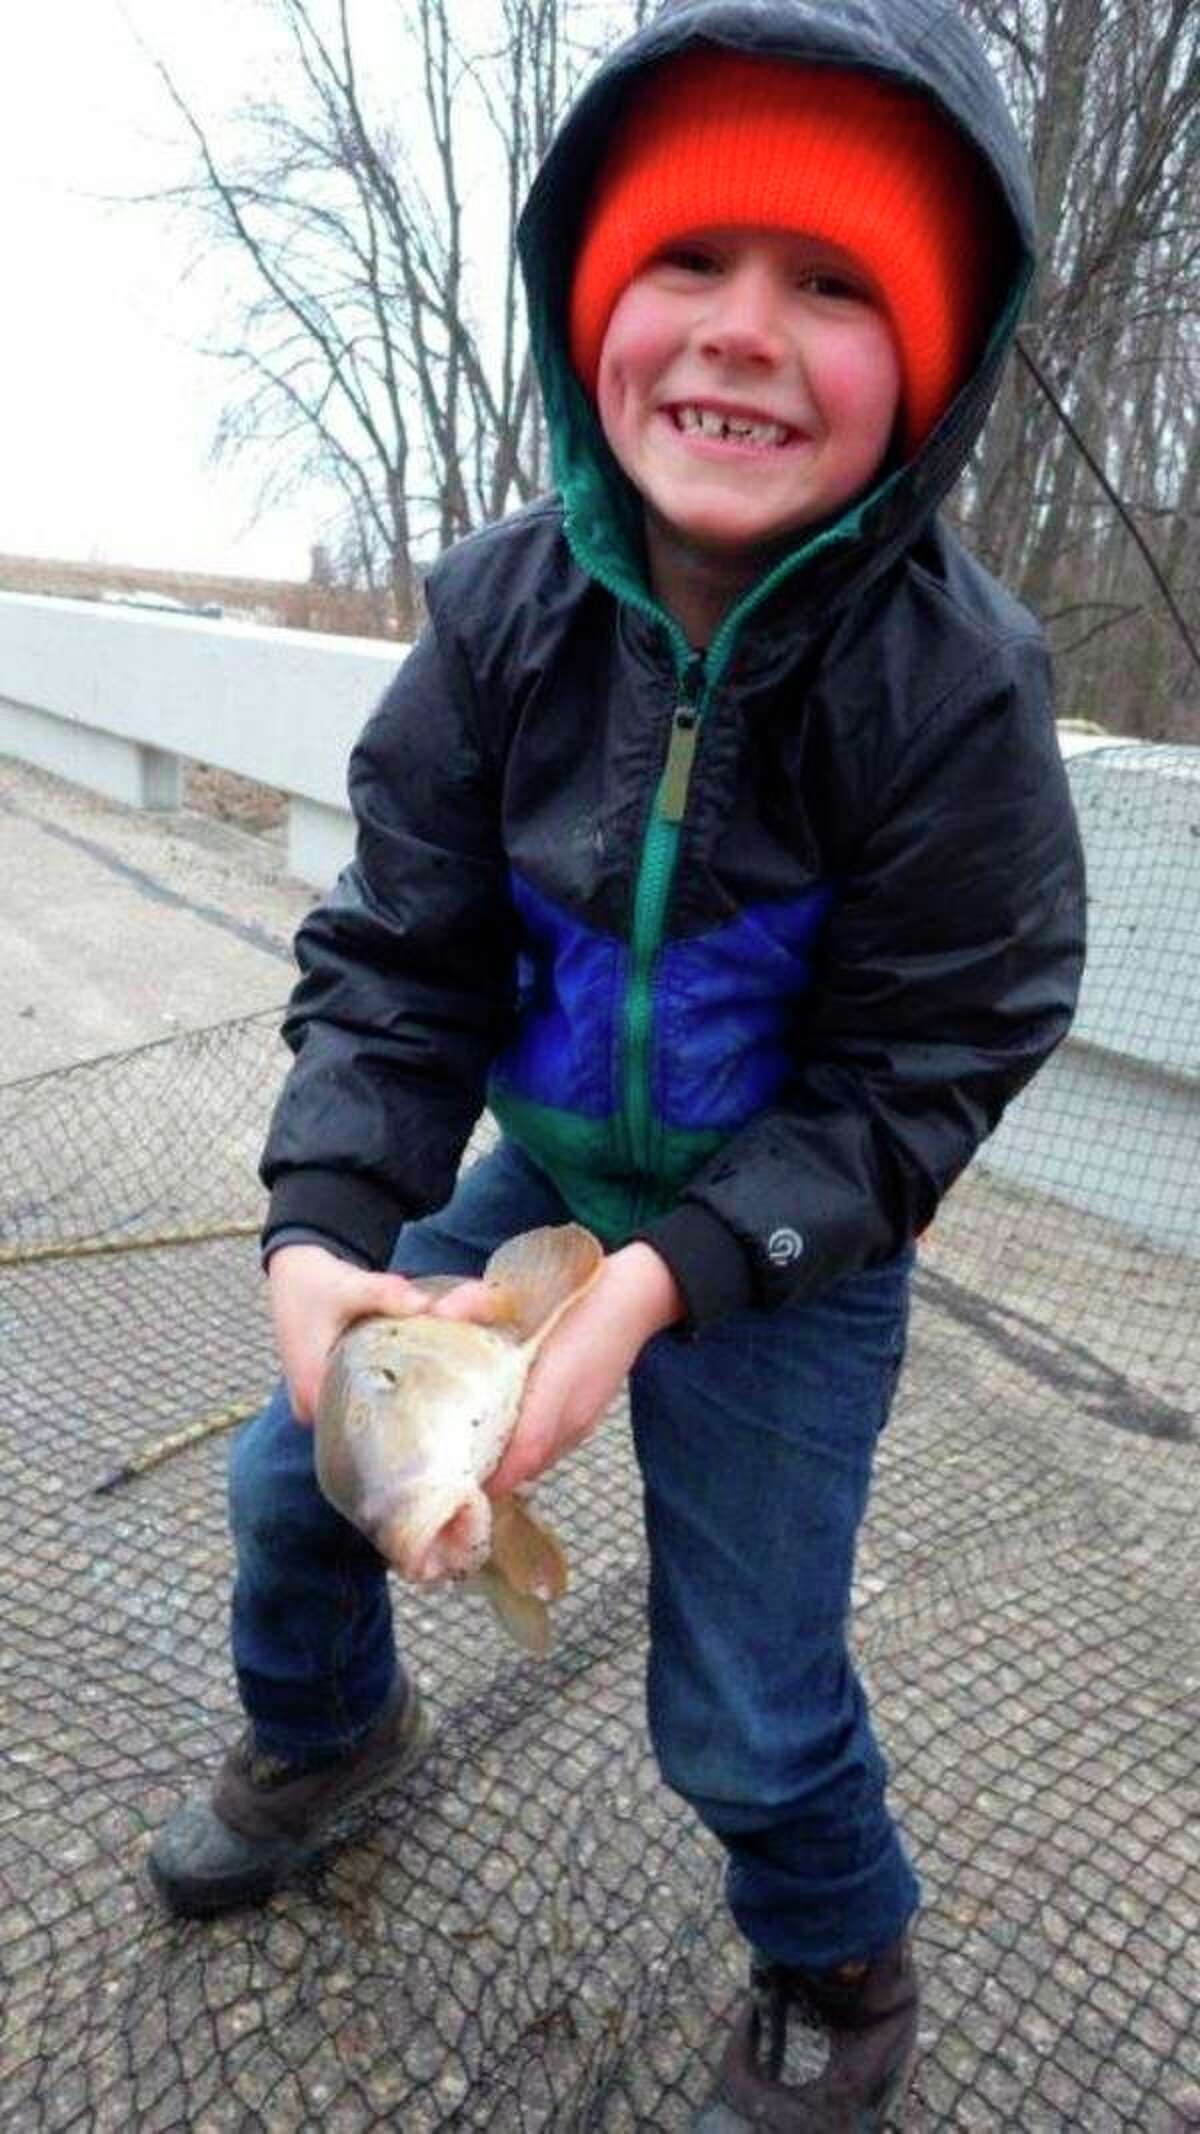 Raiden Peacock of Midland, 6, was excited to lift a large sucker out of the net last Saturday during the Talaski clan's annual spring fishing get-together in the Thumb. (Tom Lounsbury/Hearst Michigan)